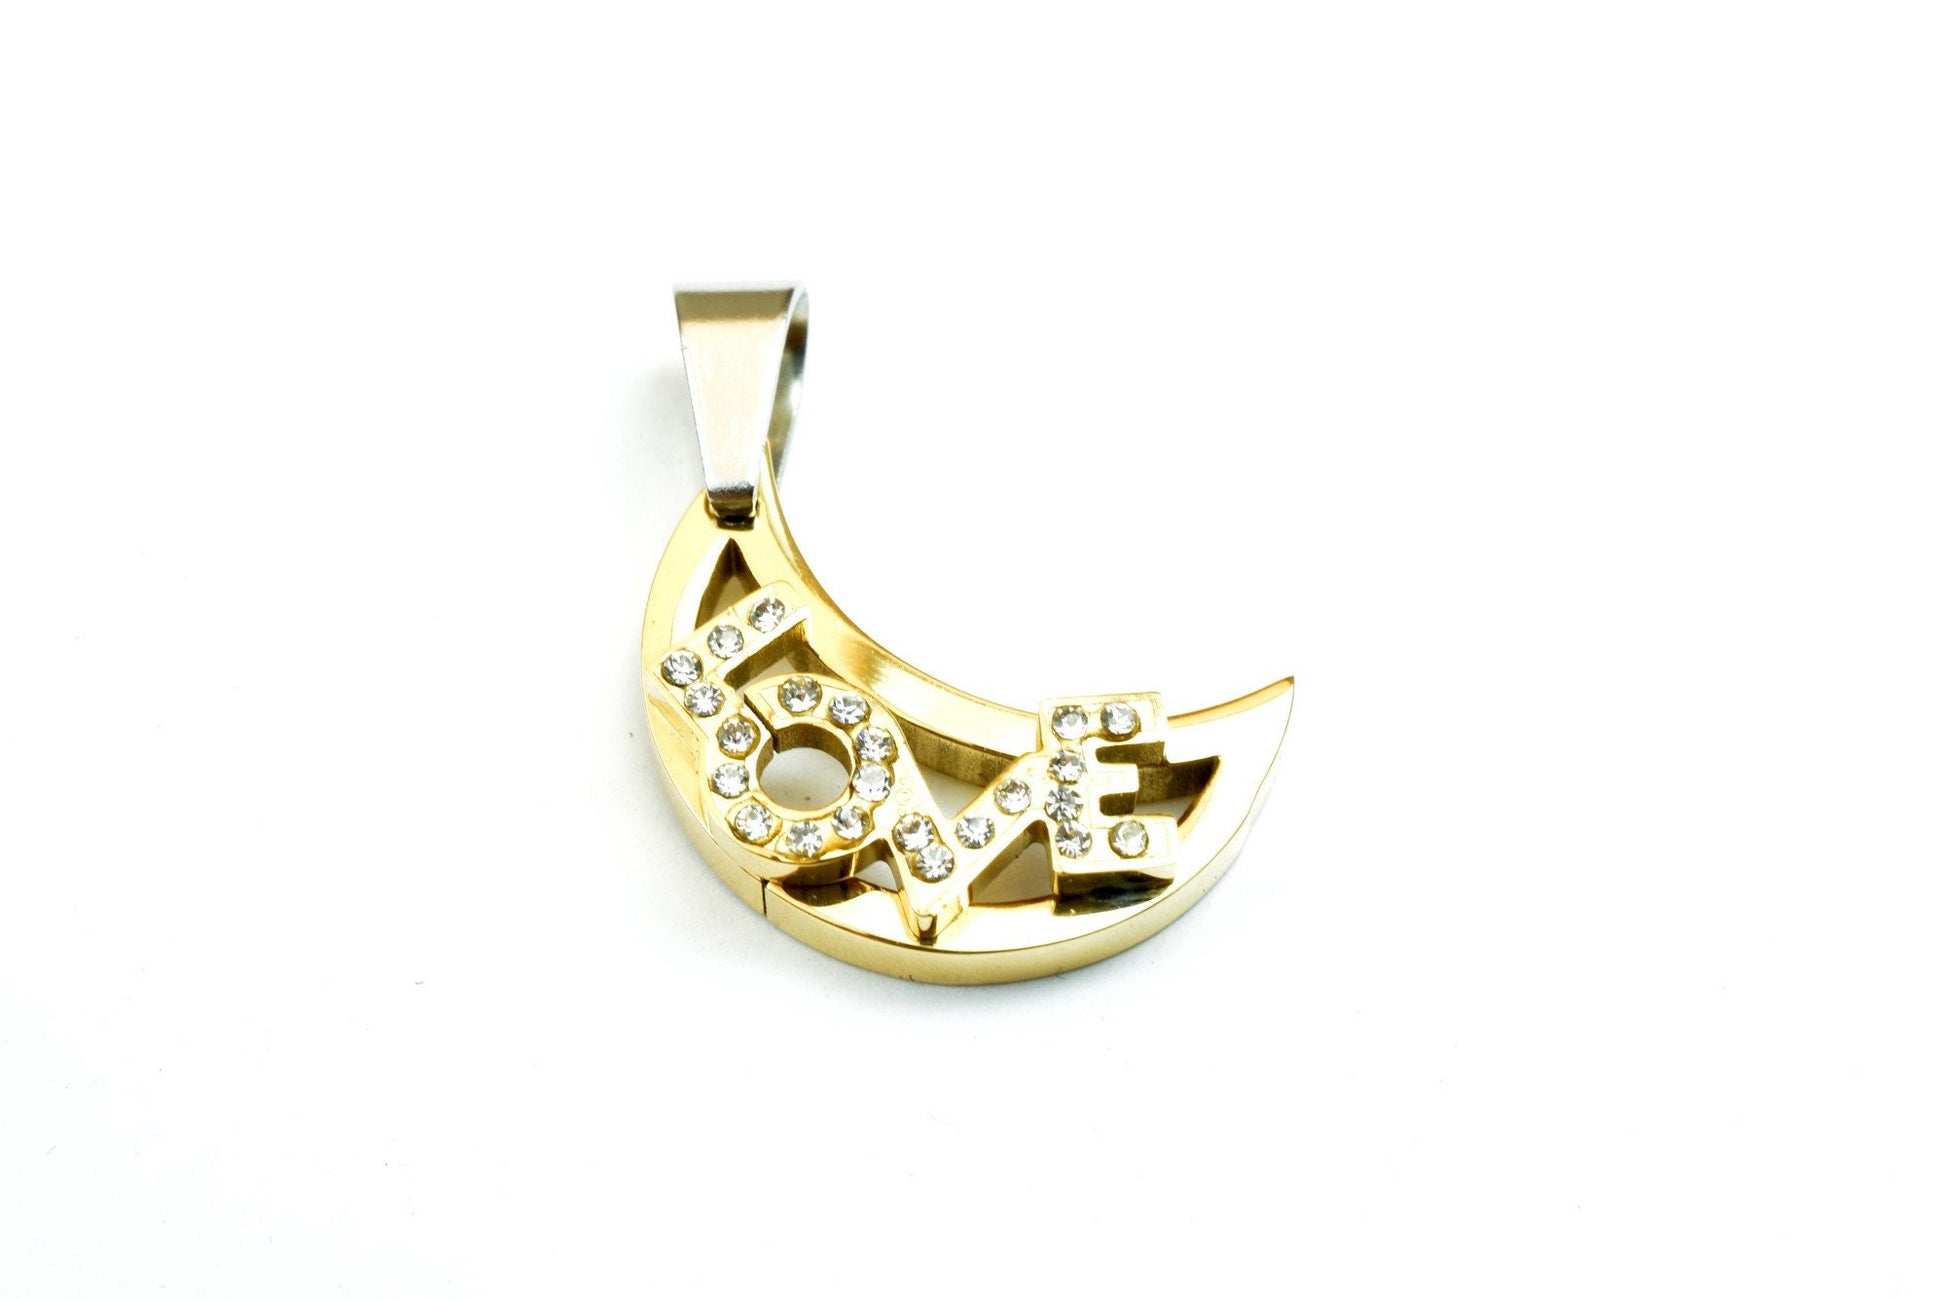 18K Gold Filled Love Moon Stainless Steel Pendant With Rhinestone CZ Cubic Zirconia Charm Size 22x15mm For Jewelry Making